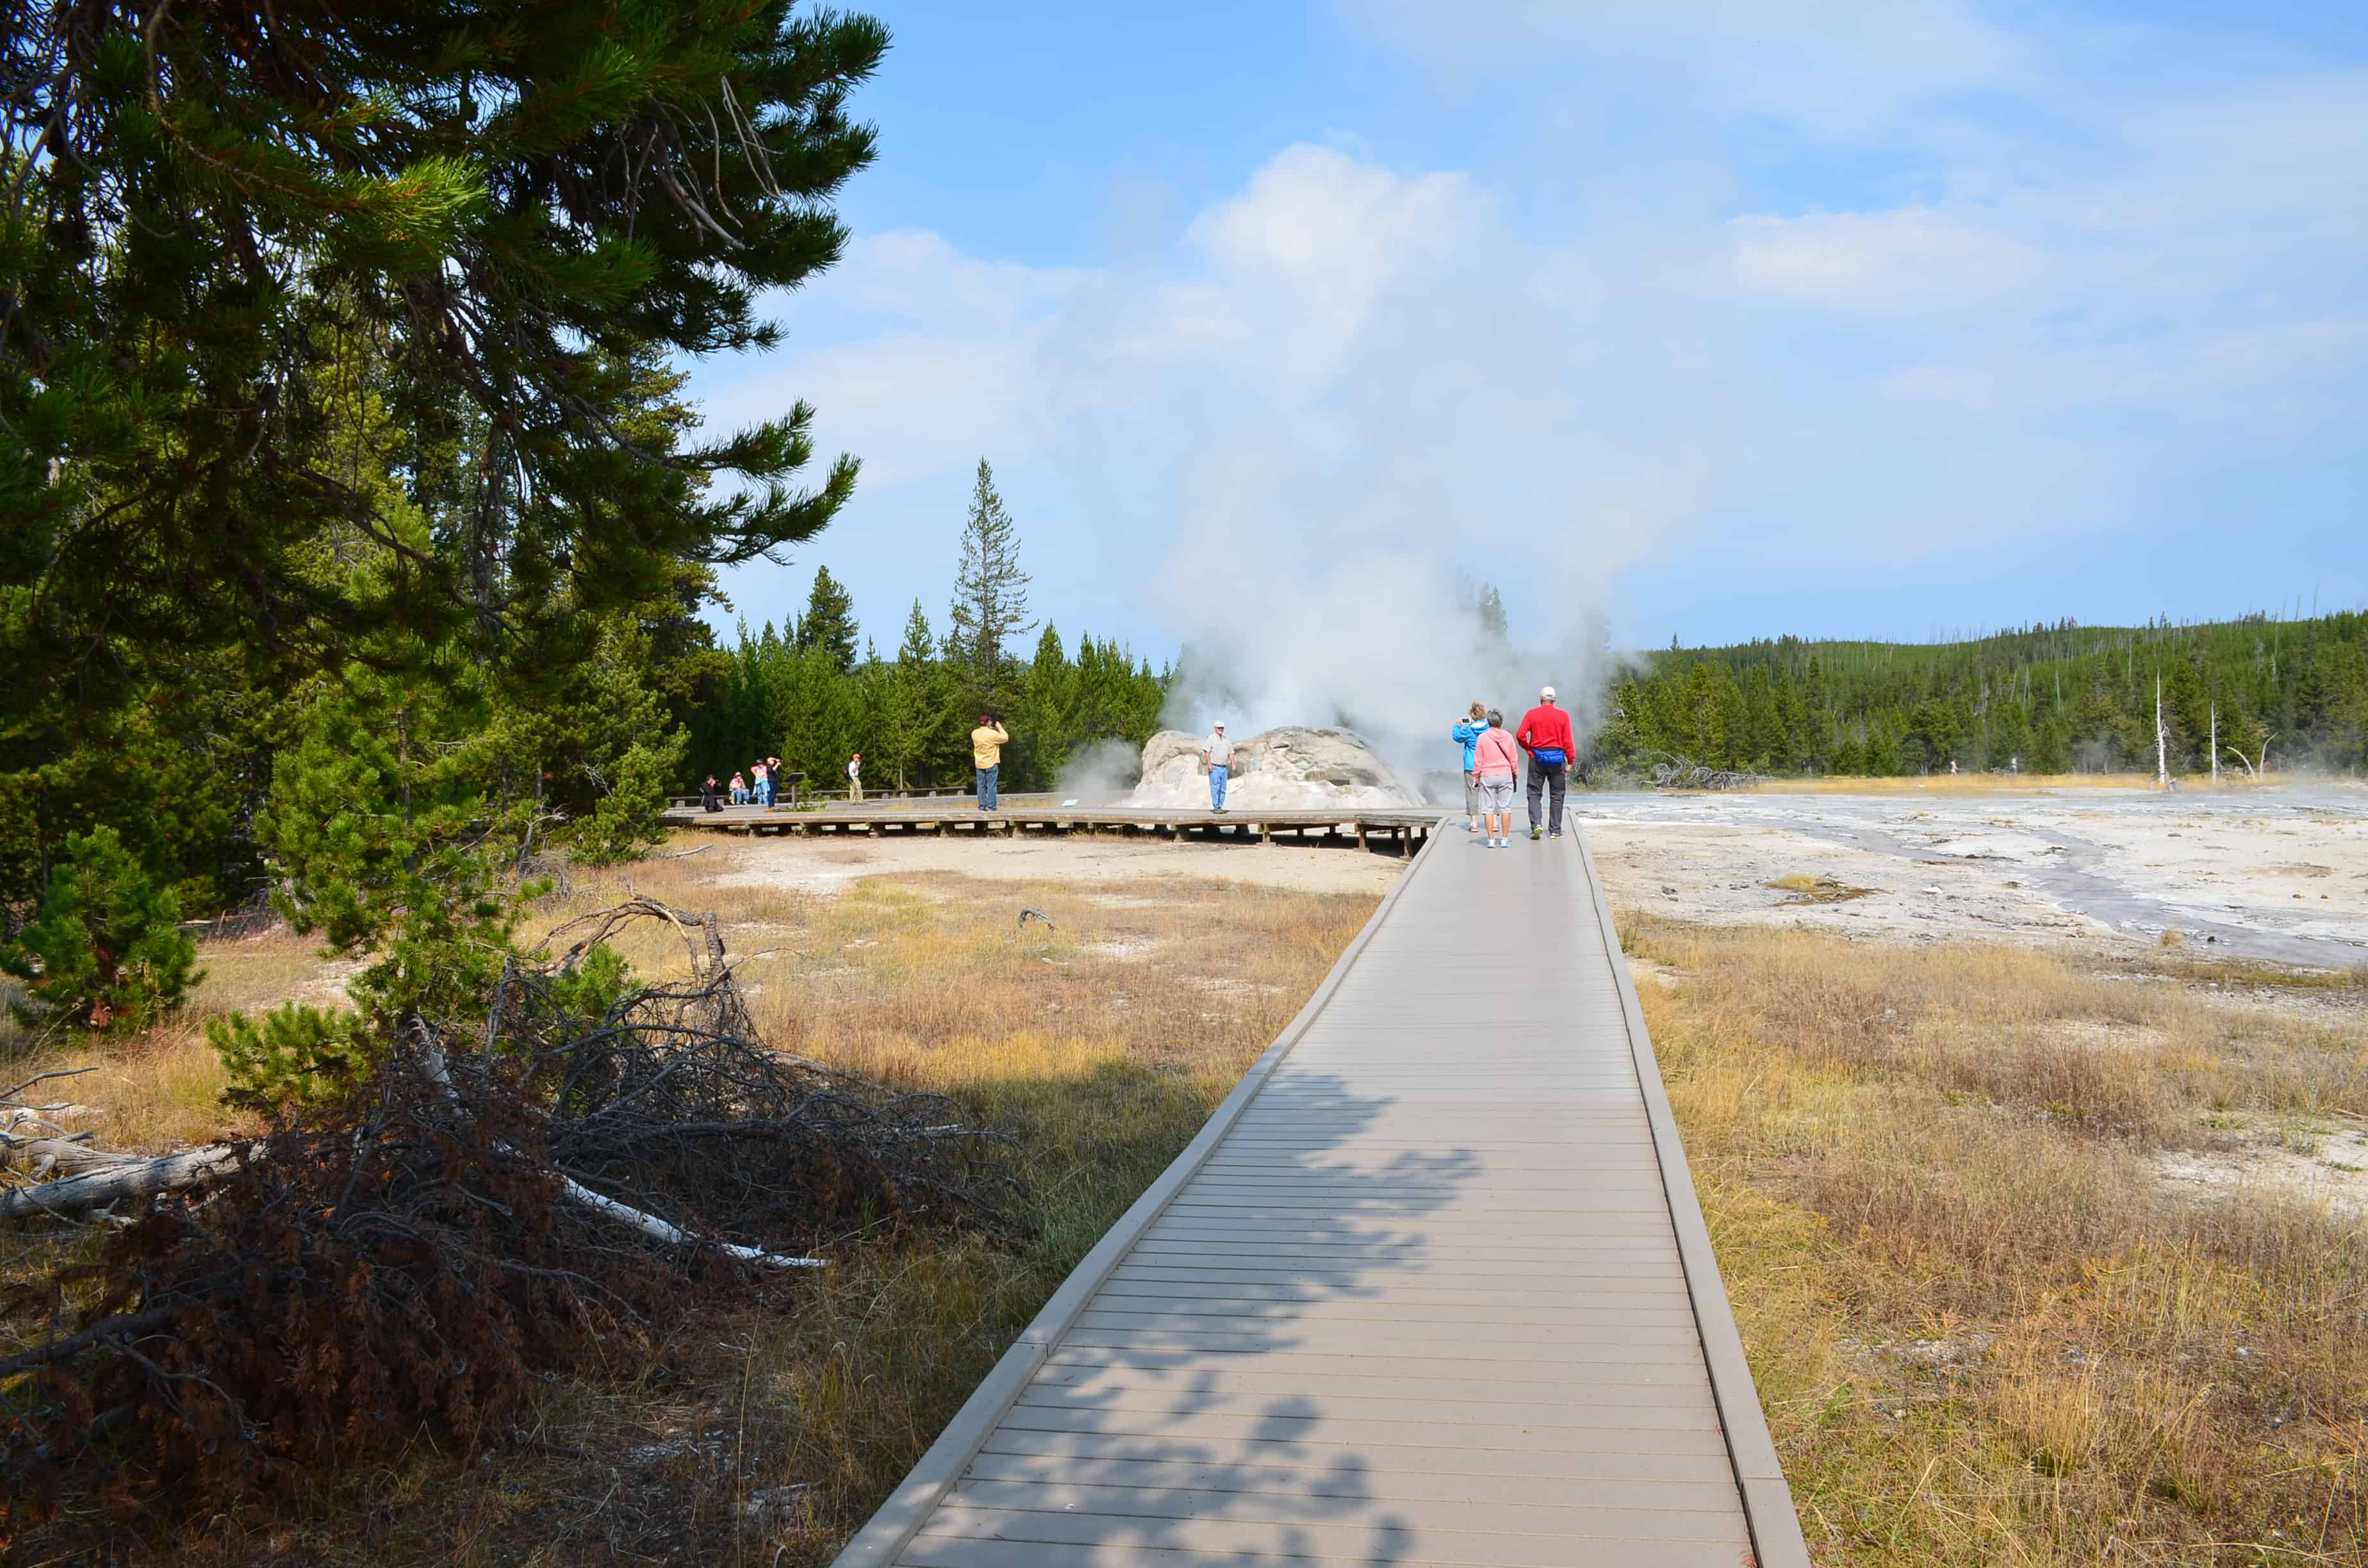 Path to Grotto Group at the Upper Geyser Basin in Yellowstone National Park, Wyoming